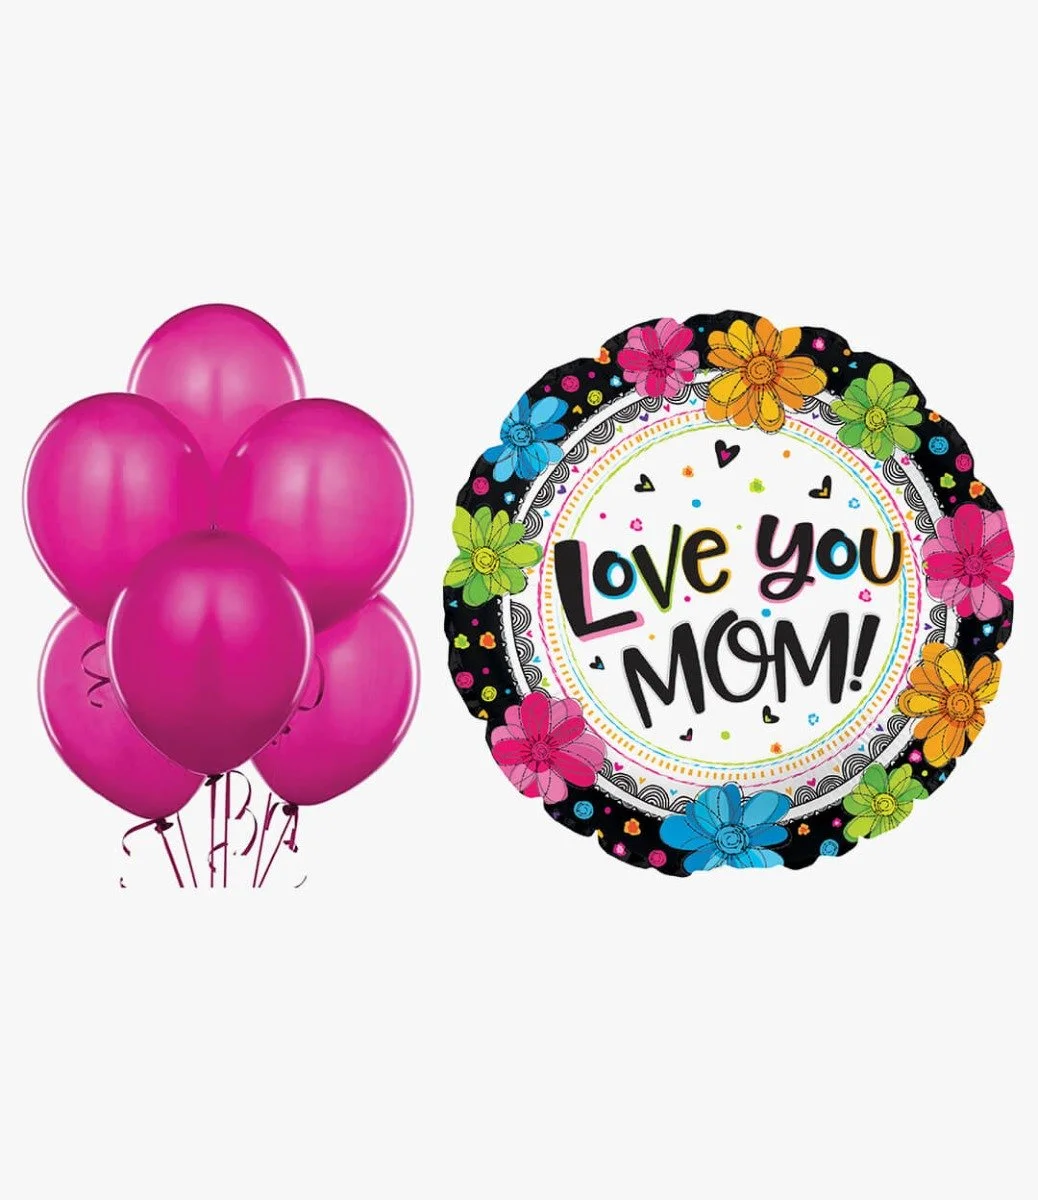 One foil mom balloon with 6 pink balloons